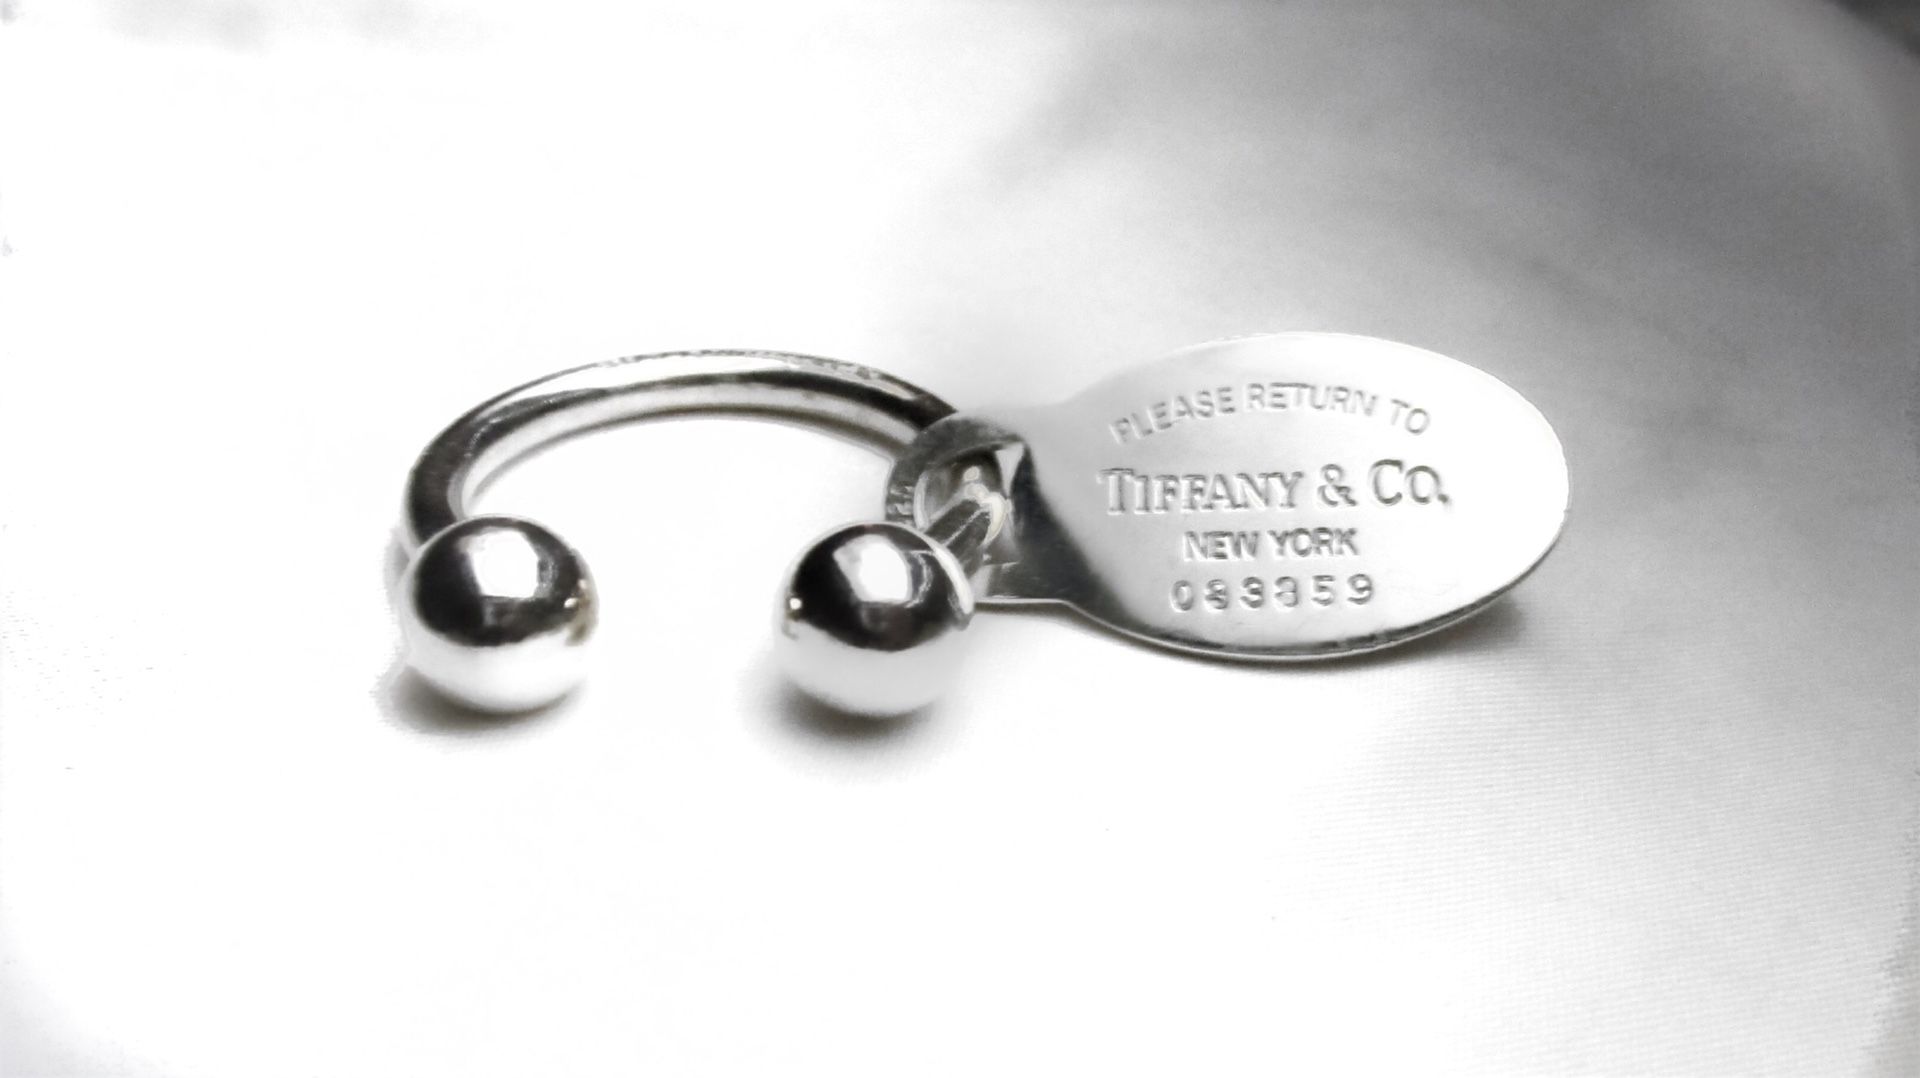 Tiffany and Co Sterling Silver Key Chain 150$ Retail